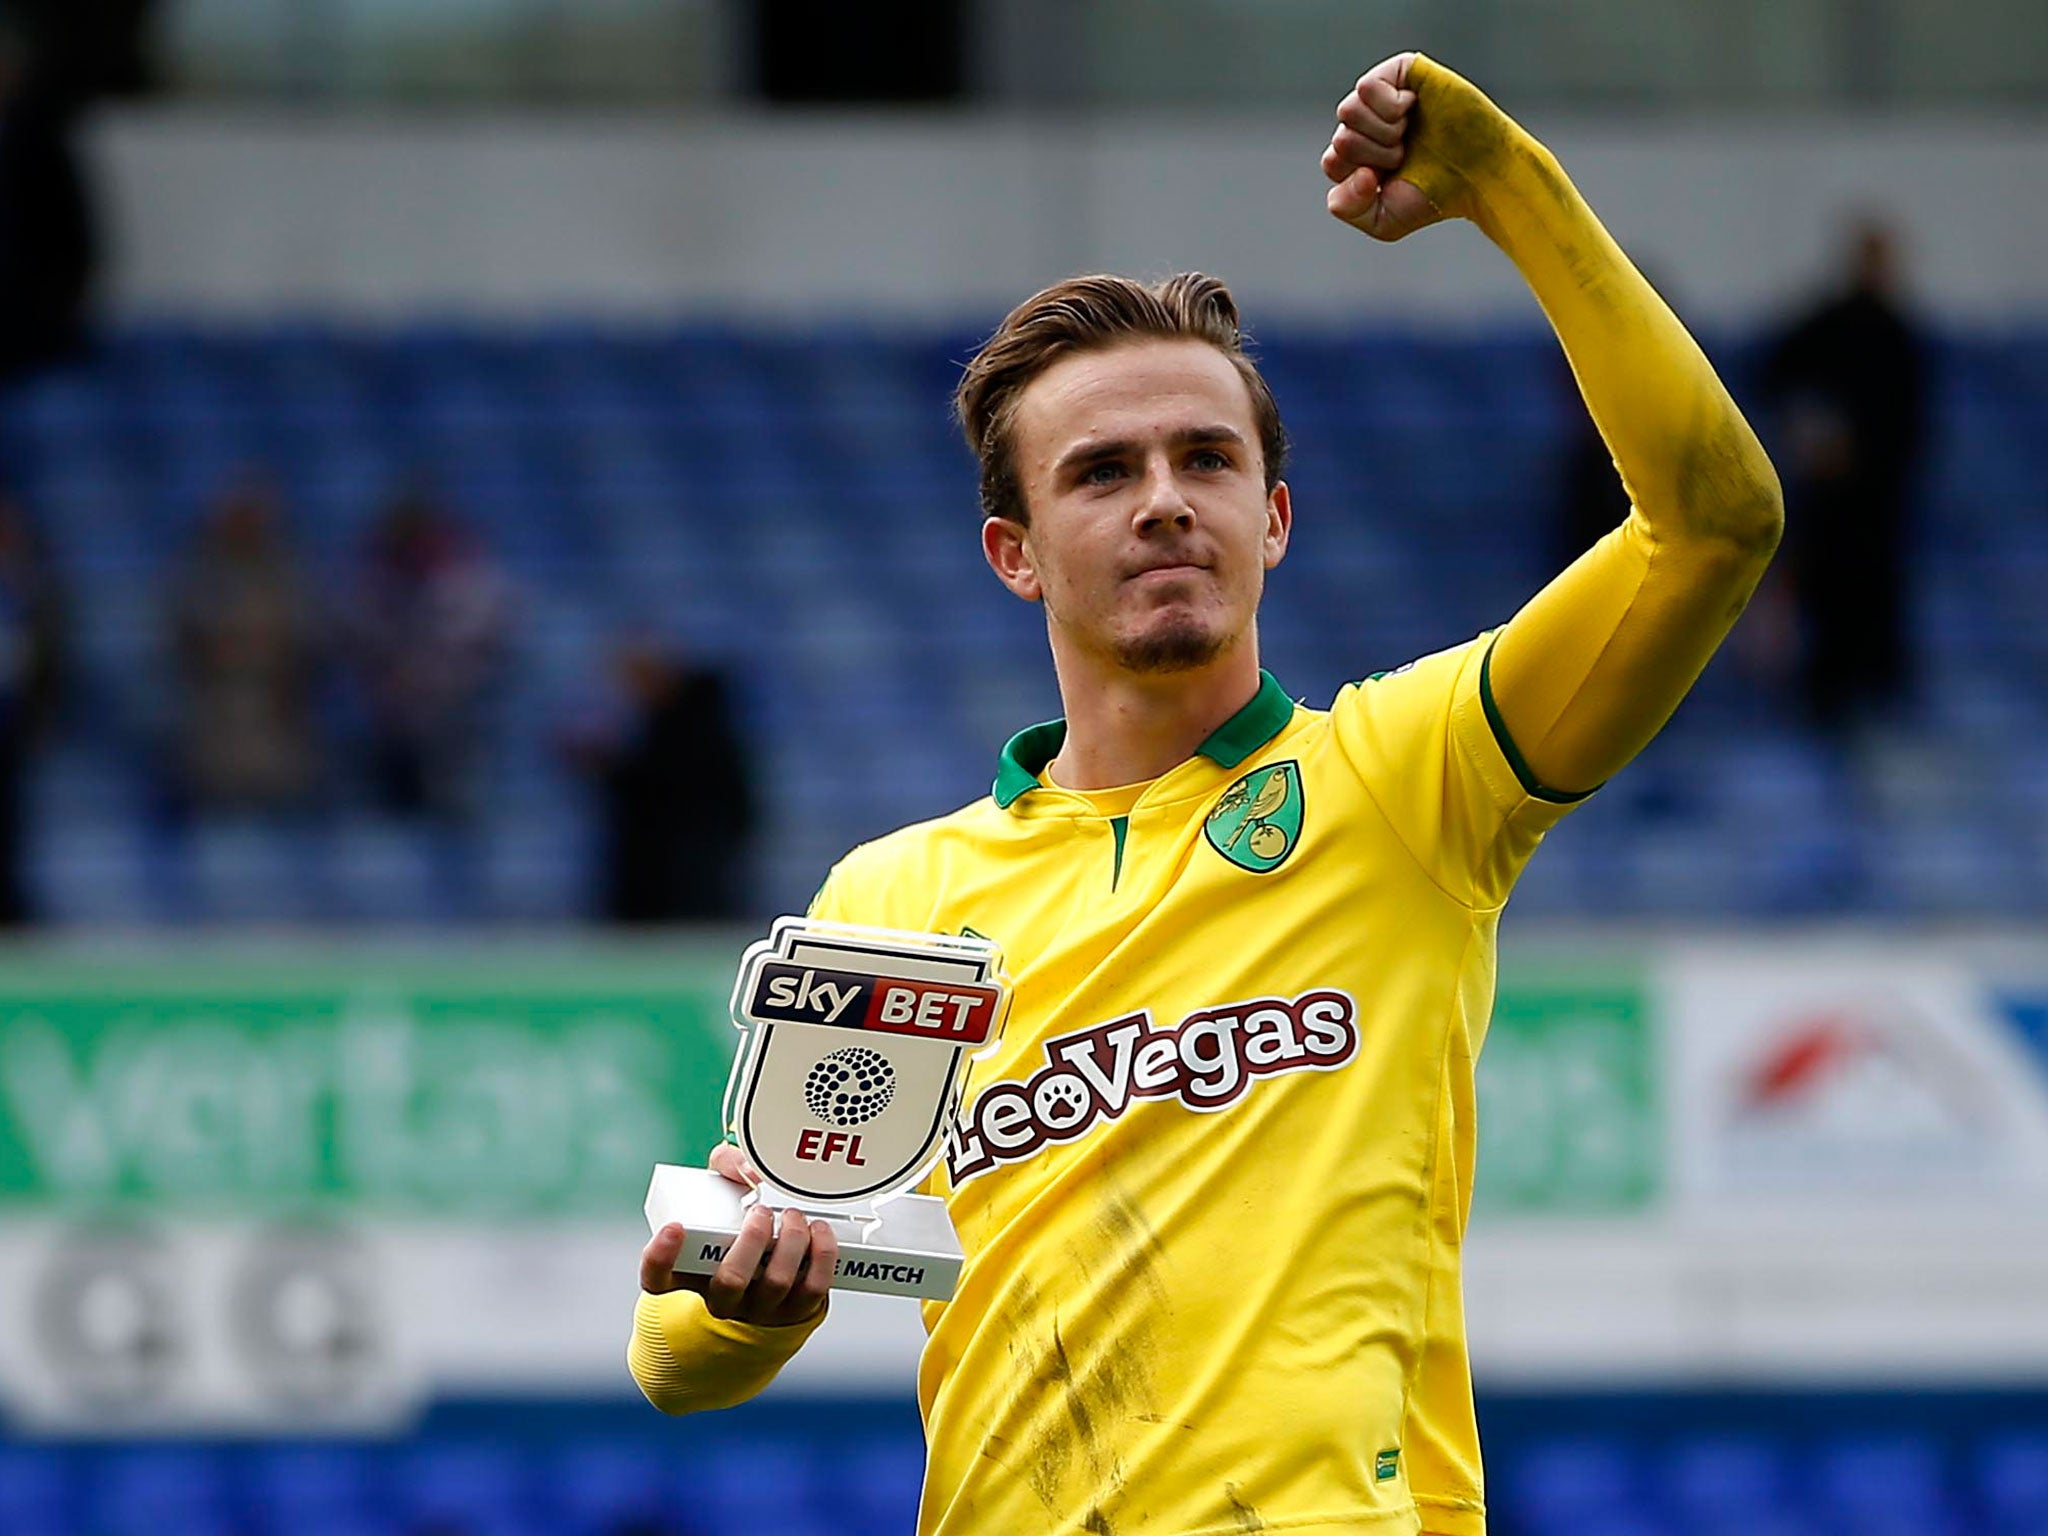 Maddison was named Norwich's Player of the Year after a fine individual season despite the club's inconsistent campaign